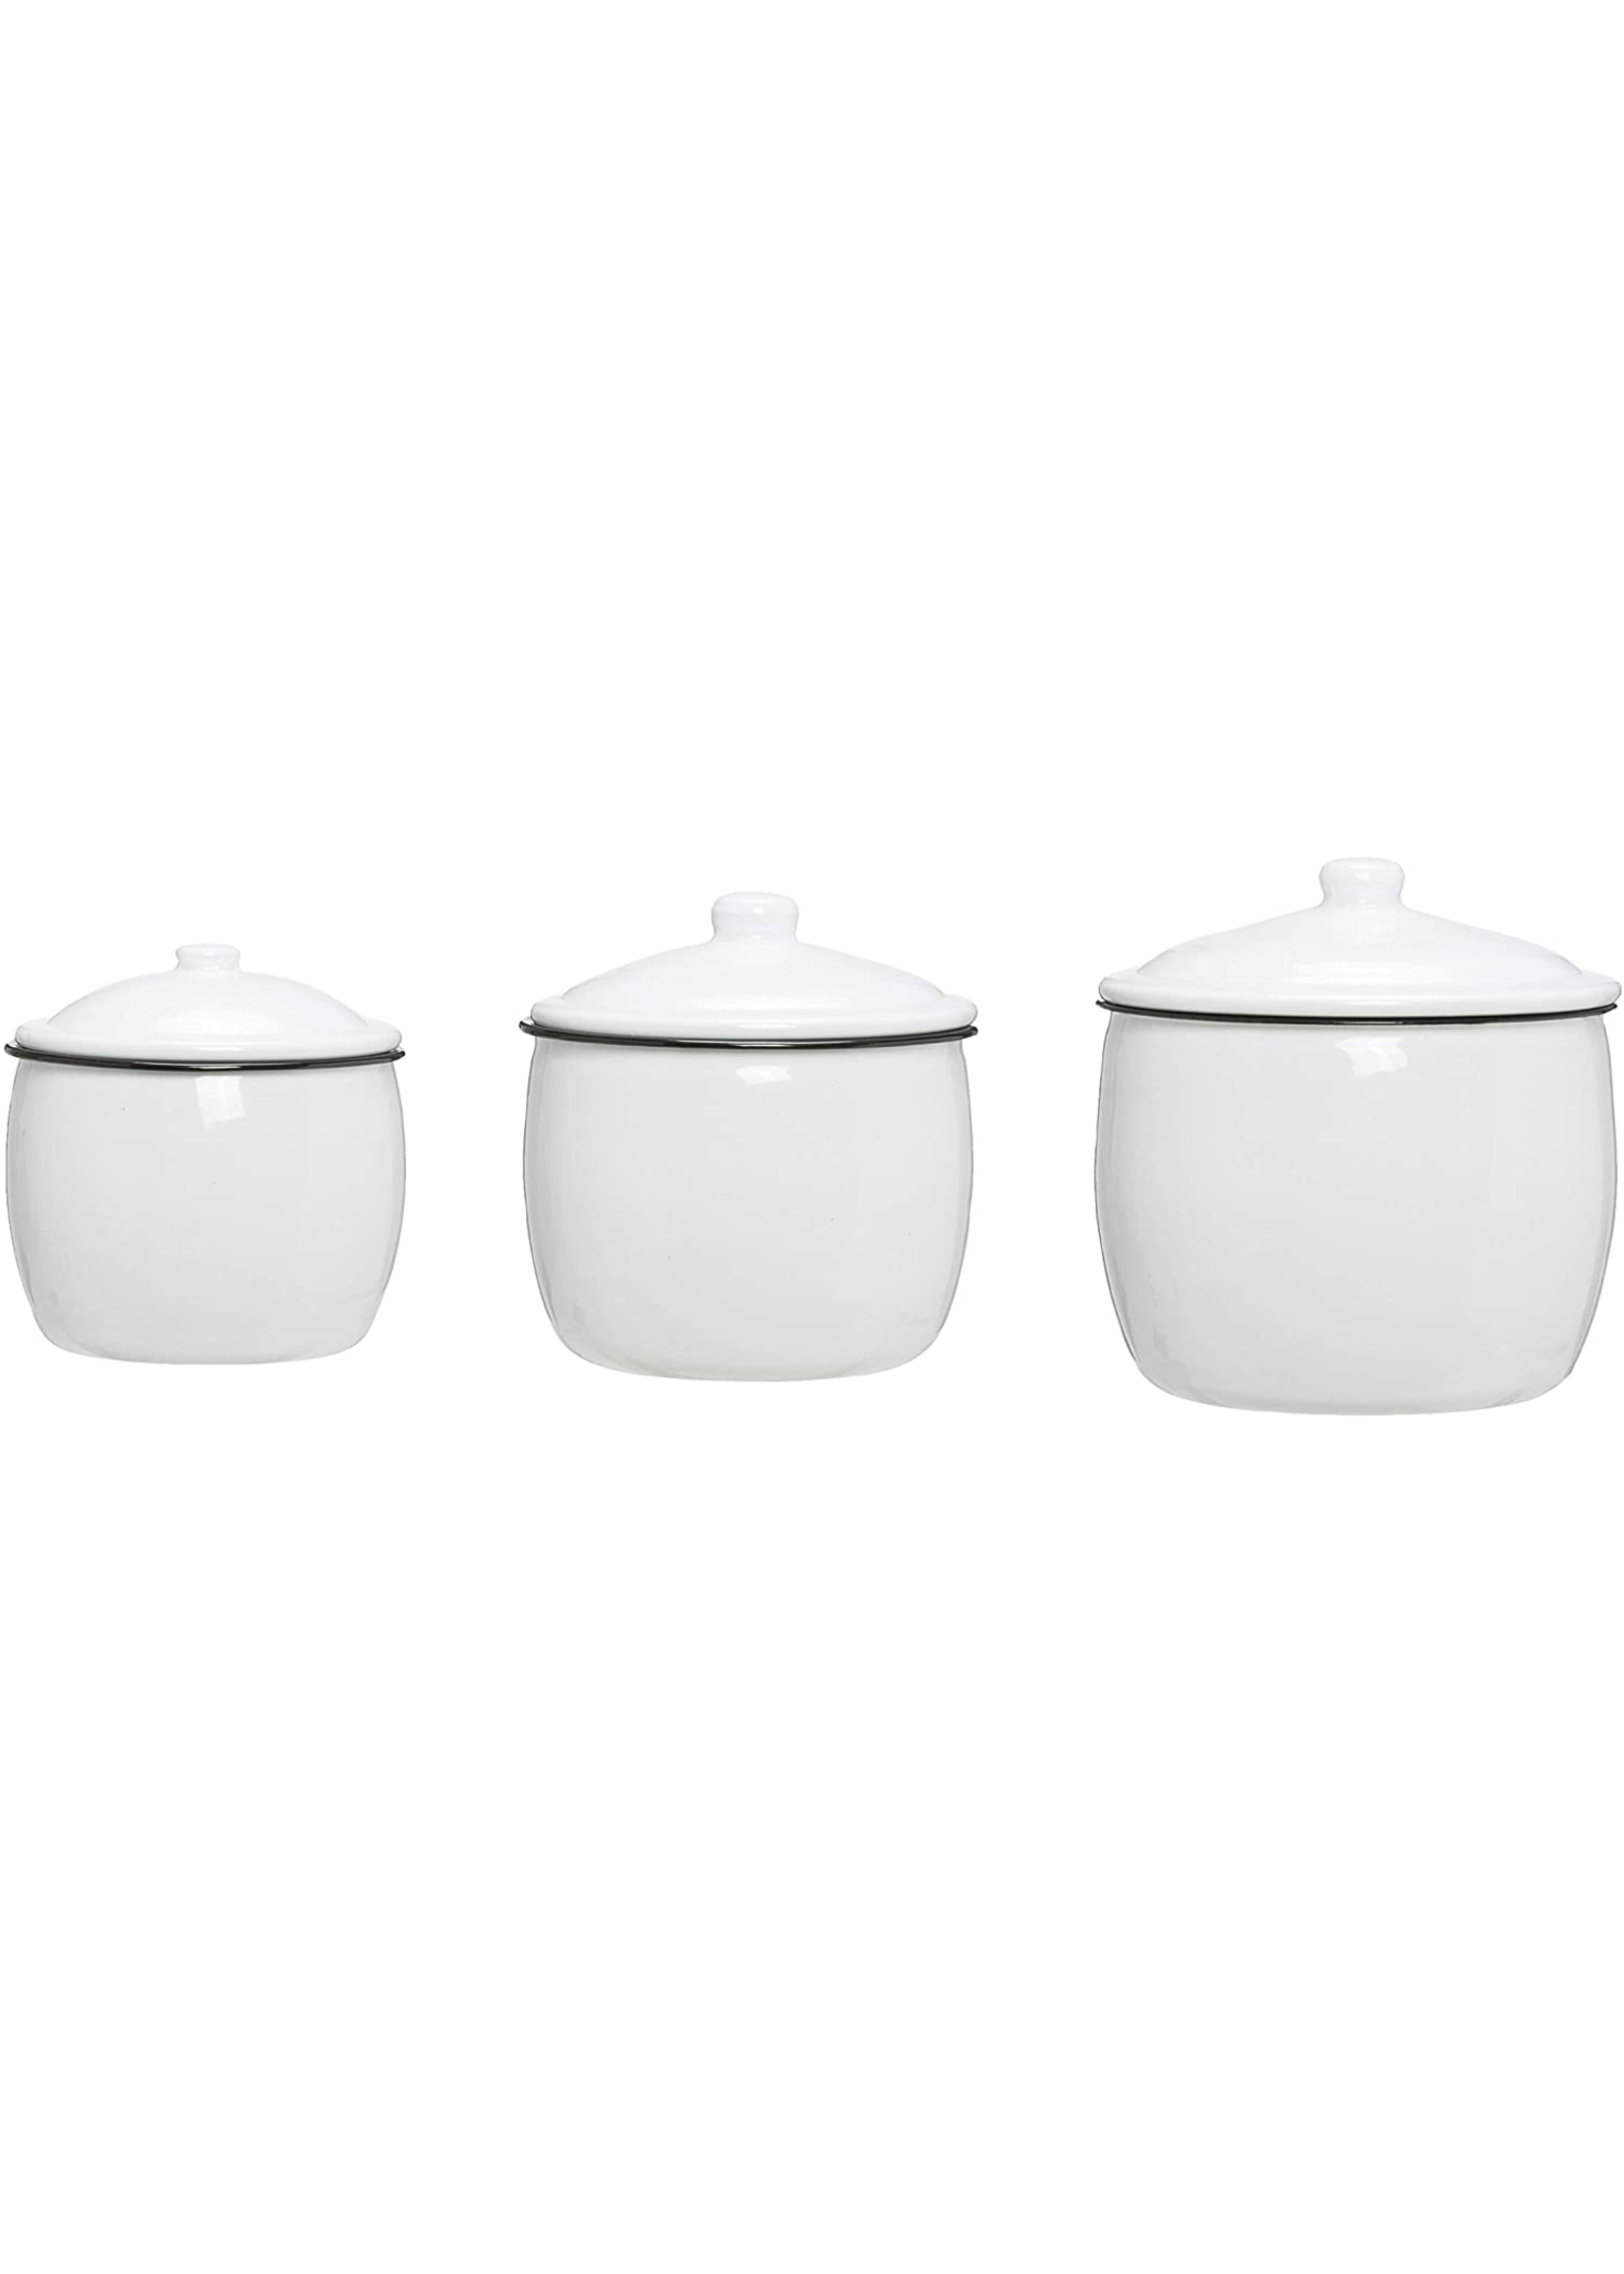 CREATIVE CO-OP WHITE ENAMEL 3 PIECE CANISTER SET